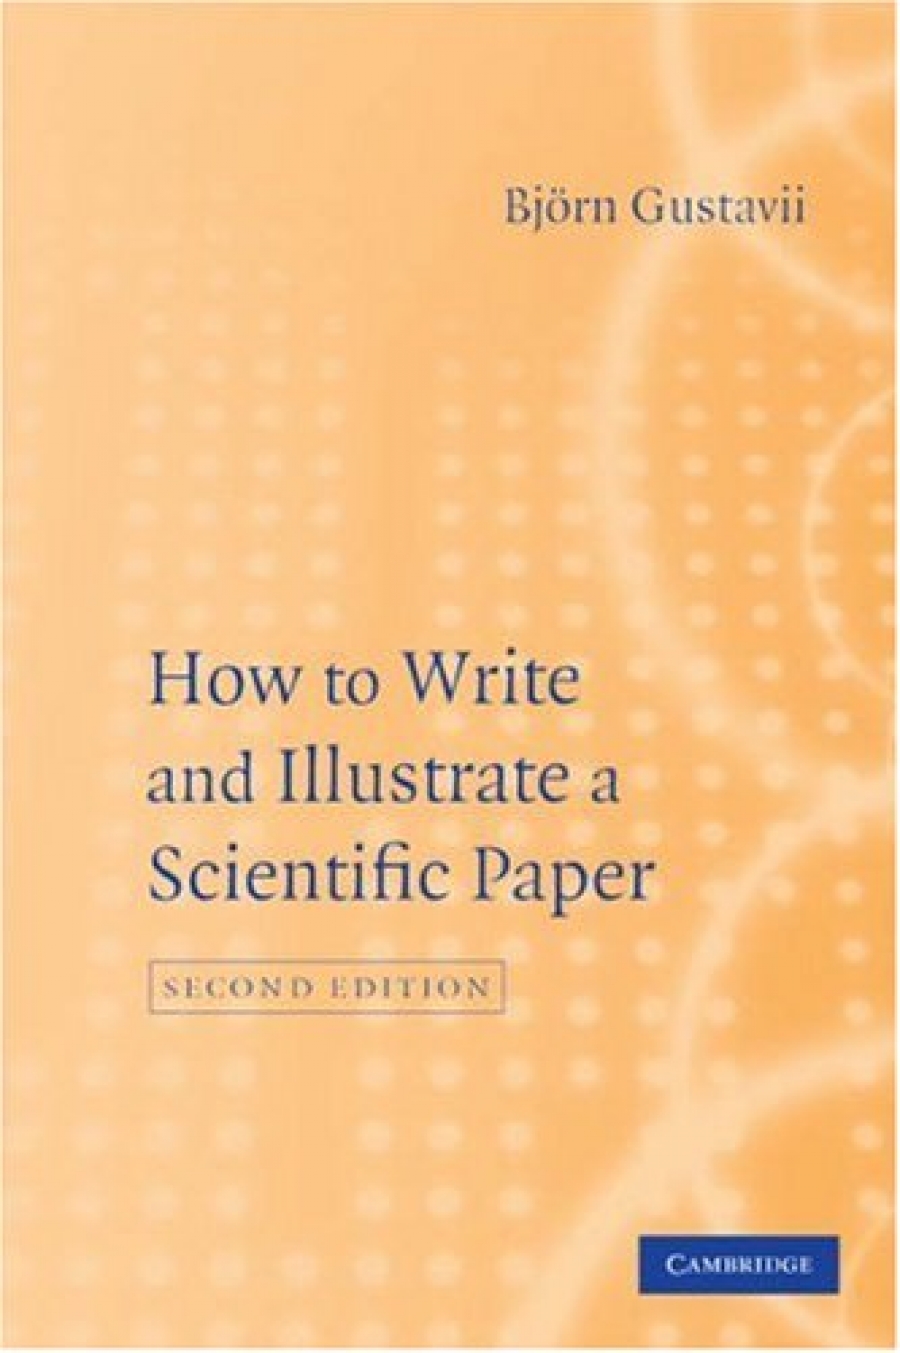 Bjorn Gustavii How to Write and Illustrate a Scientific Paper 